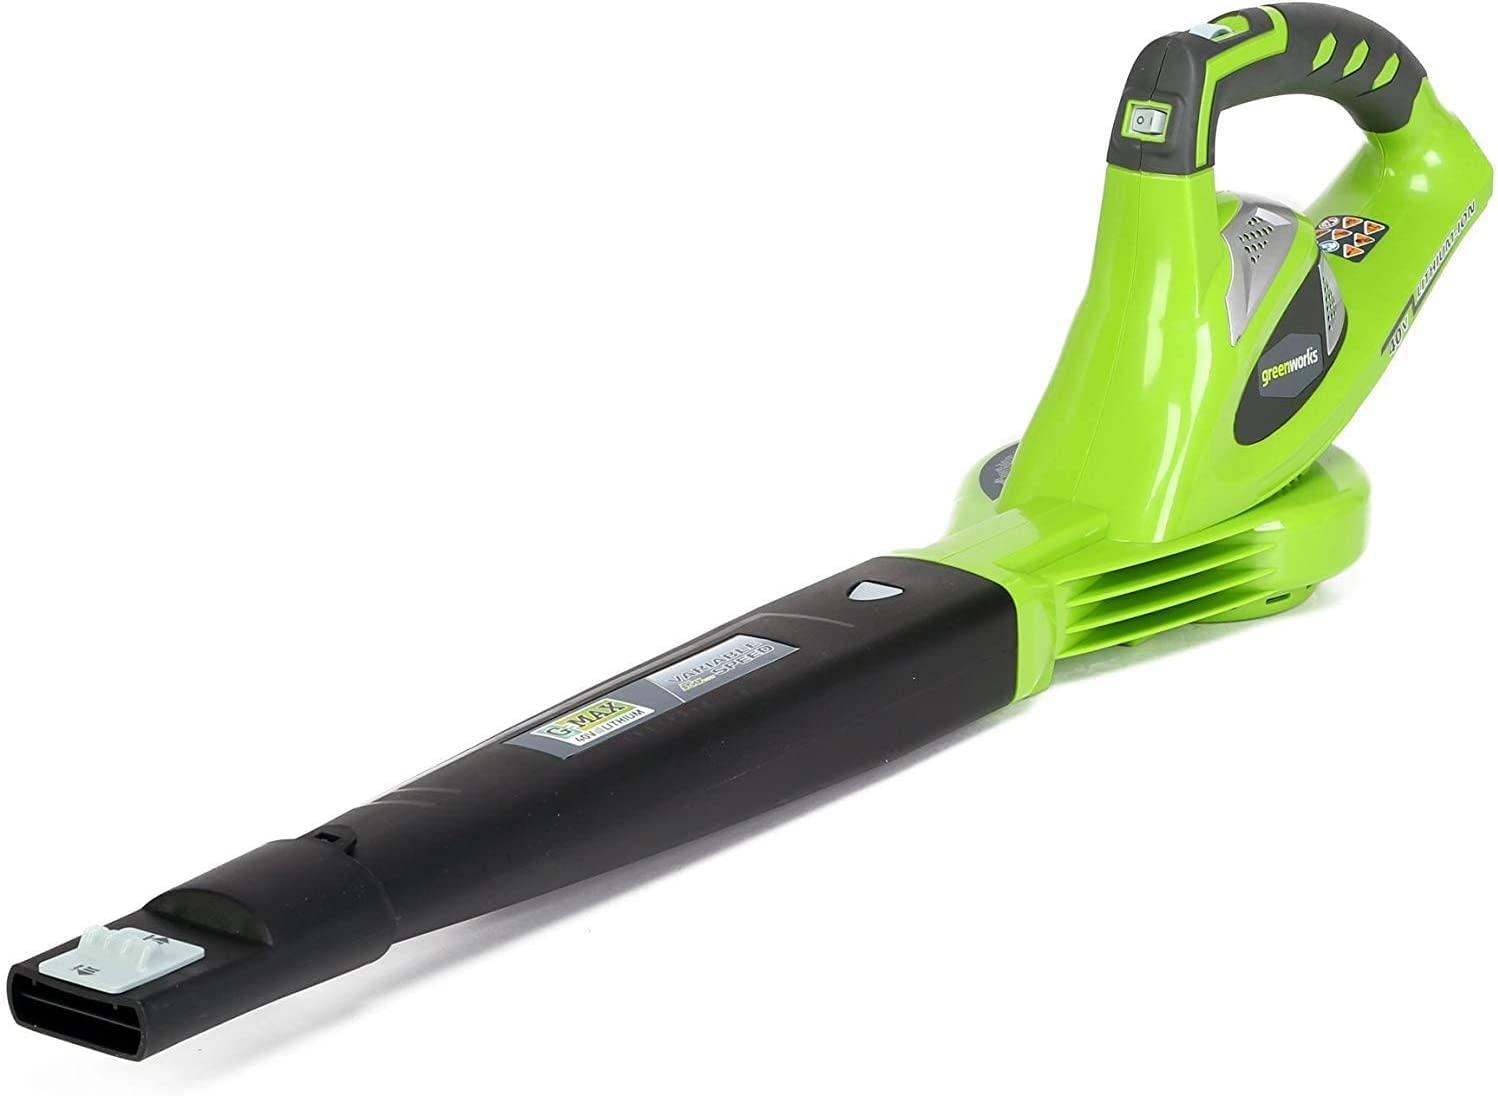 Greenworks 40V 150MPH Cordless Blower for $41.99 Shipped